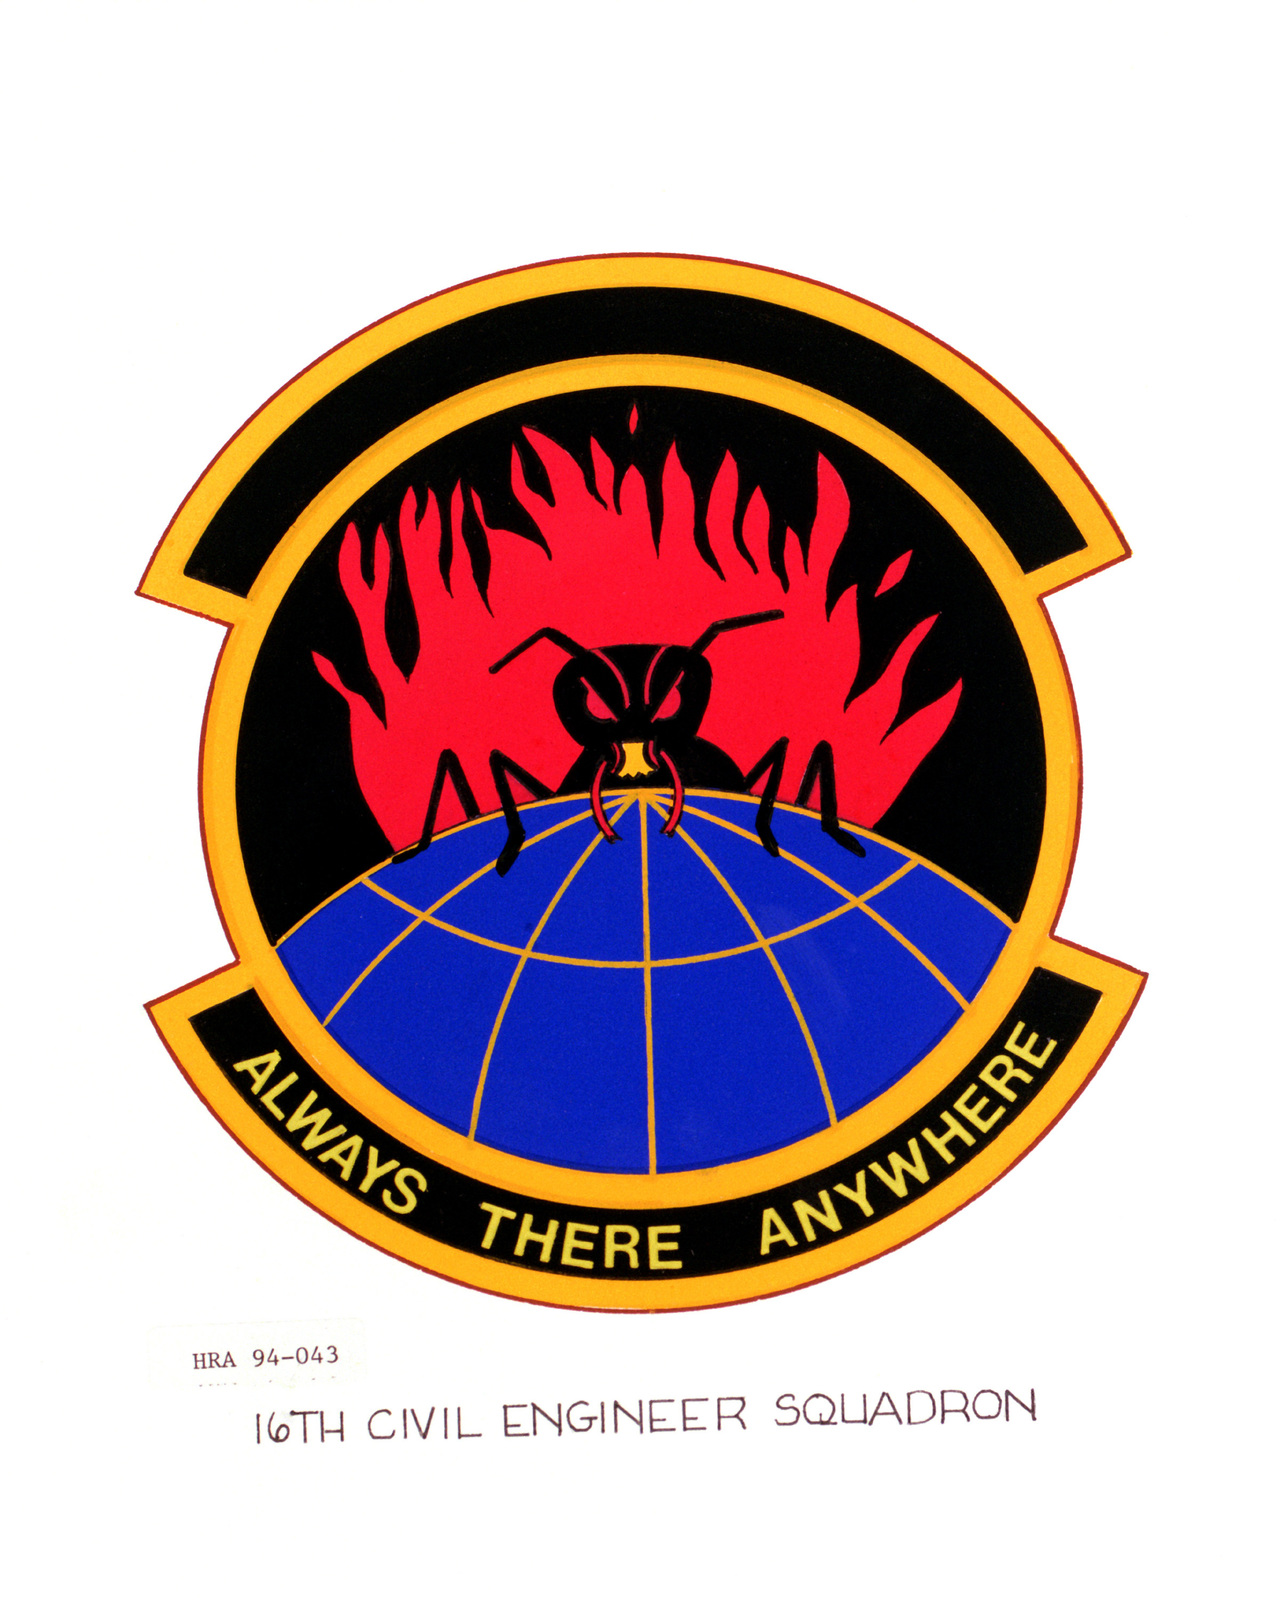 Approved Insignia of the 16th Civil Engineer Squadron.